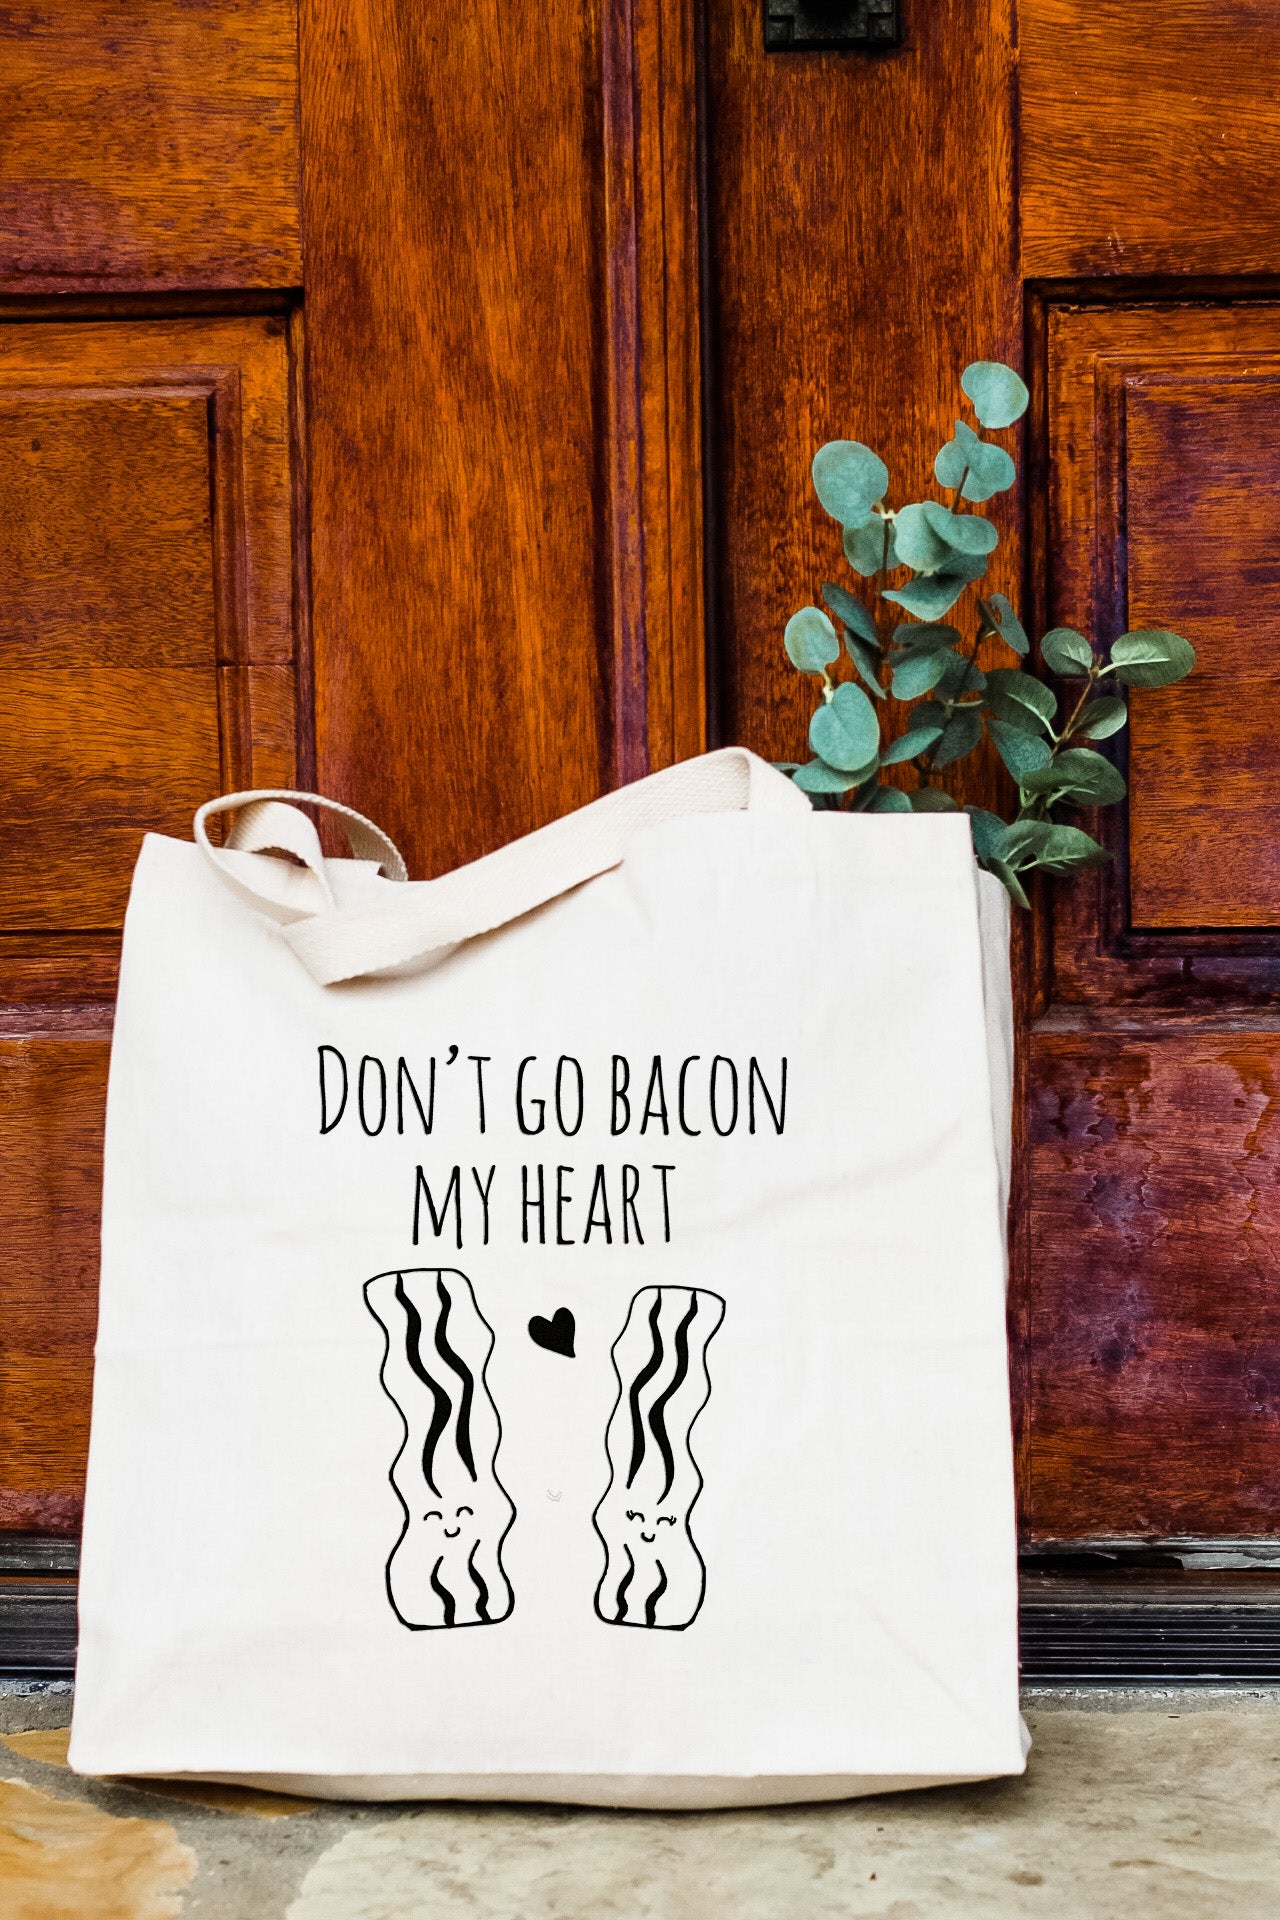 Don't Go Bacon My Heart - Full Color Tote